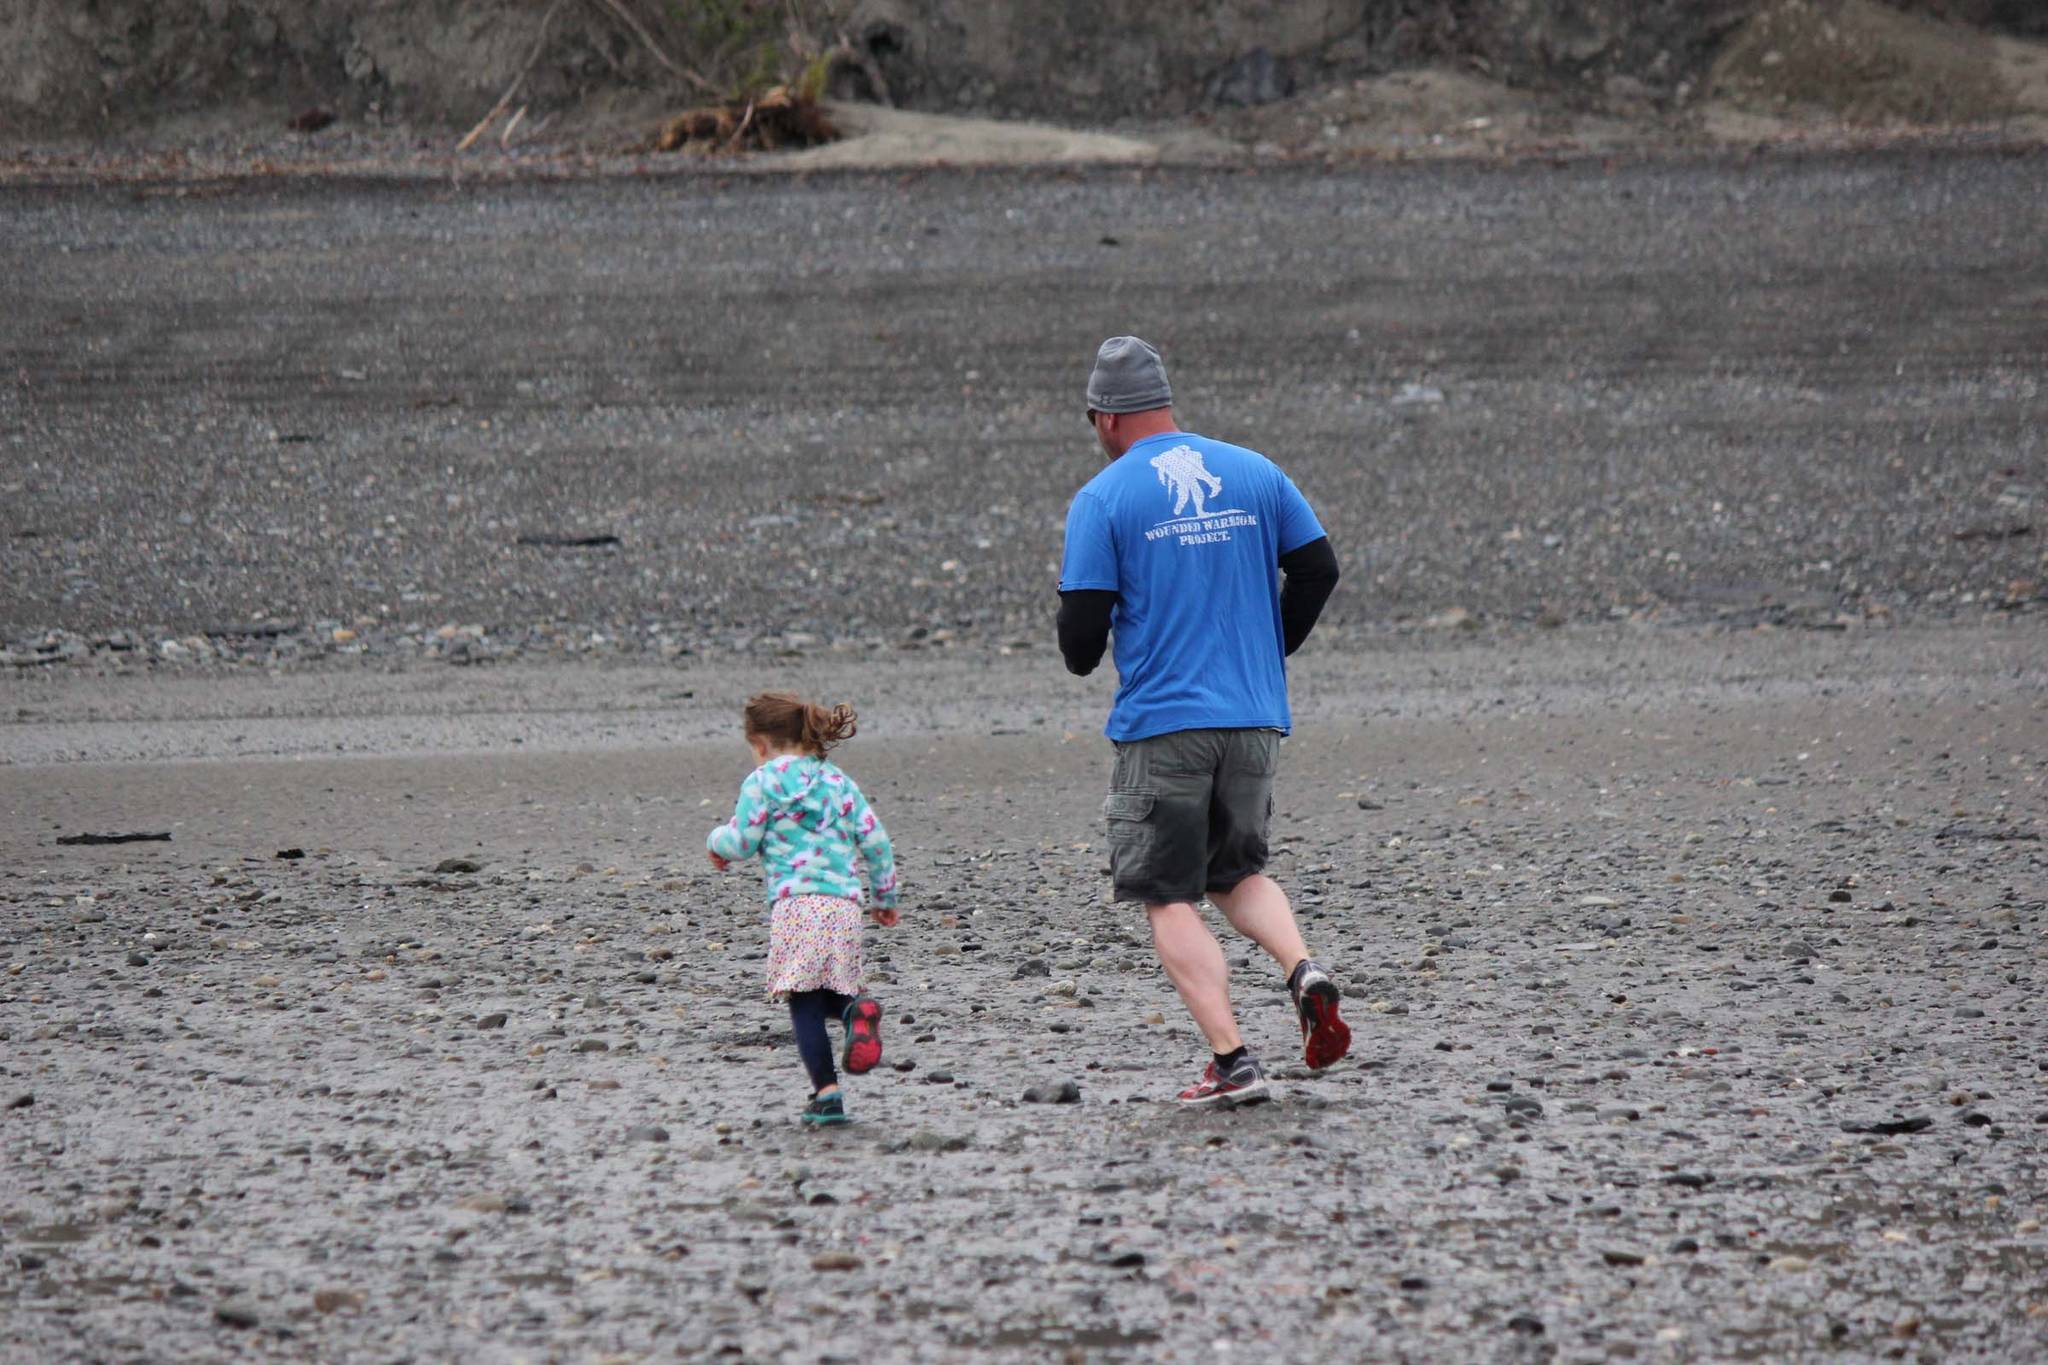 Sara Reynolds, 3, didn’t let age keep her out of the 5K Clam Scramble held Saturday, June 15, 2019 in Ninilchik, Alaska. Although too young to officially register for the fun run, the determined youngster ran beside her father, Jeff Reynolds. Not pictured are Sarah’s mom, Tasha, and older sister, Avilyn, who also participated. (Photo by McKibben Jackinsky)